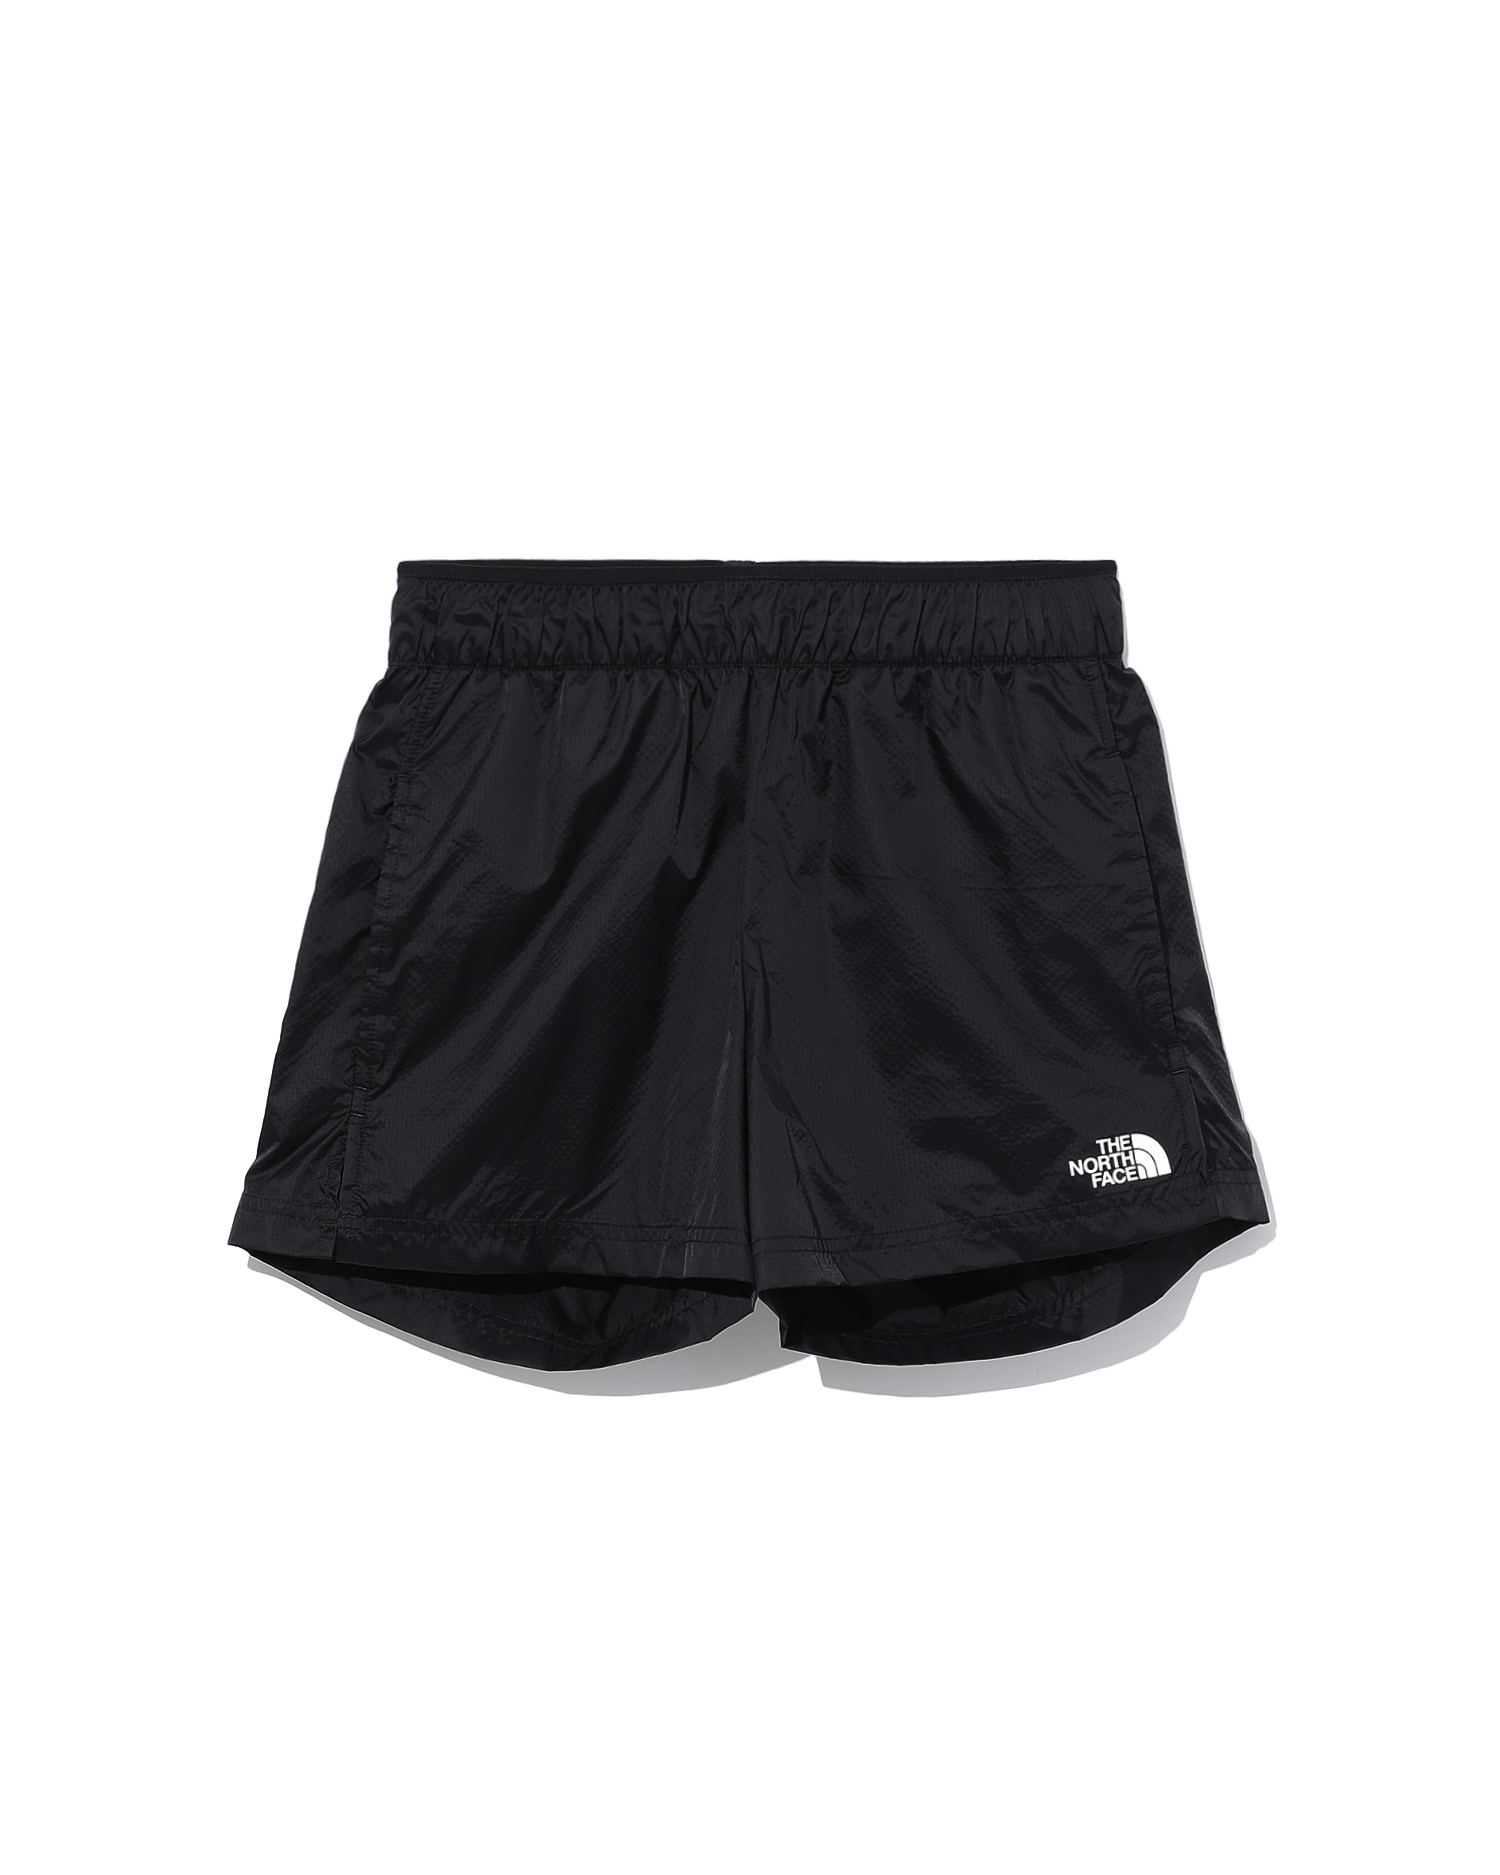 THE NORTH FACE Active Trail boxer shorts